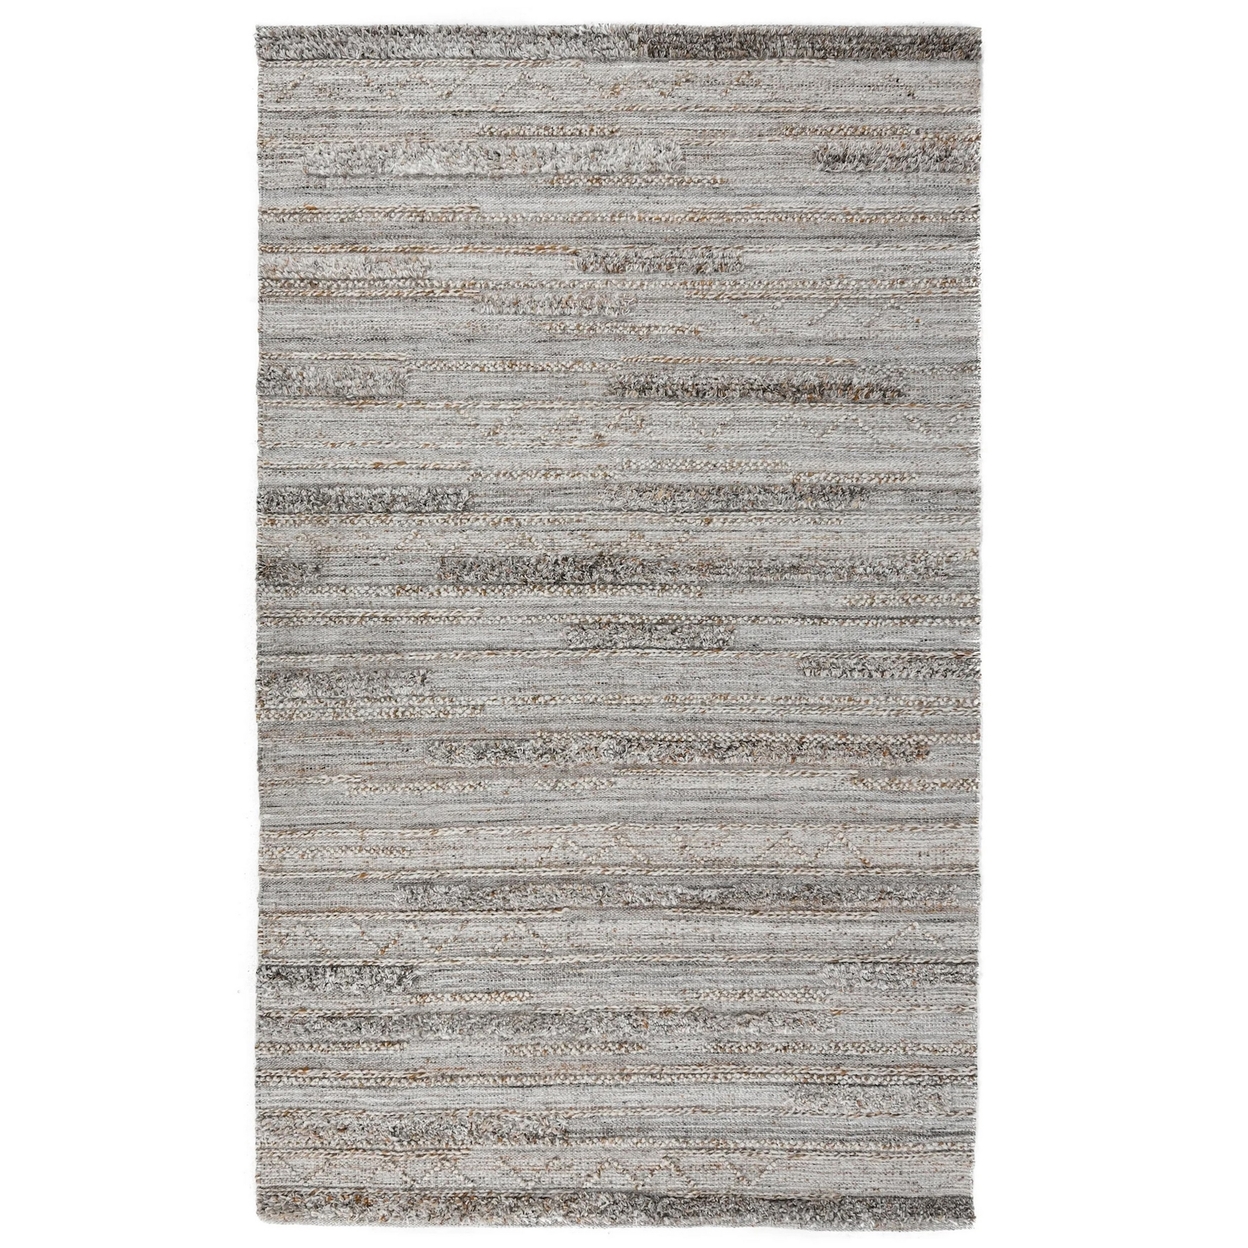 Anny 2 X 3 Indoor Outdoor Small Area Rug, Stripe Patterns, Distressed Gray- Saltoro Sherpi